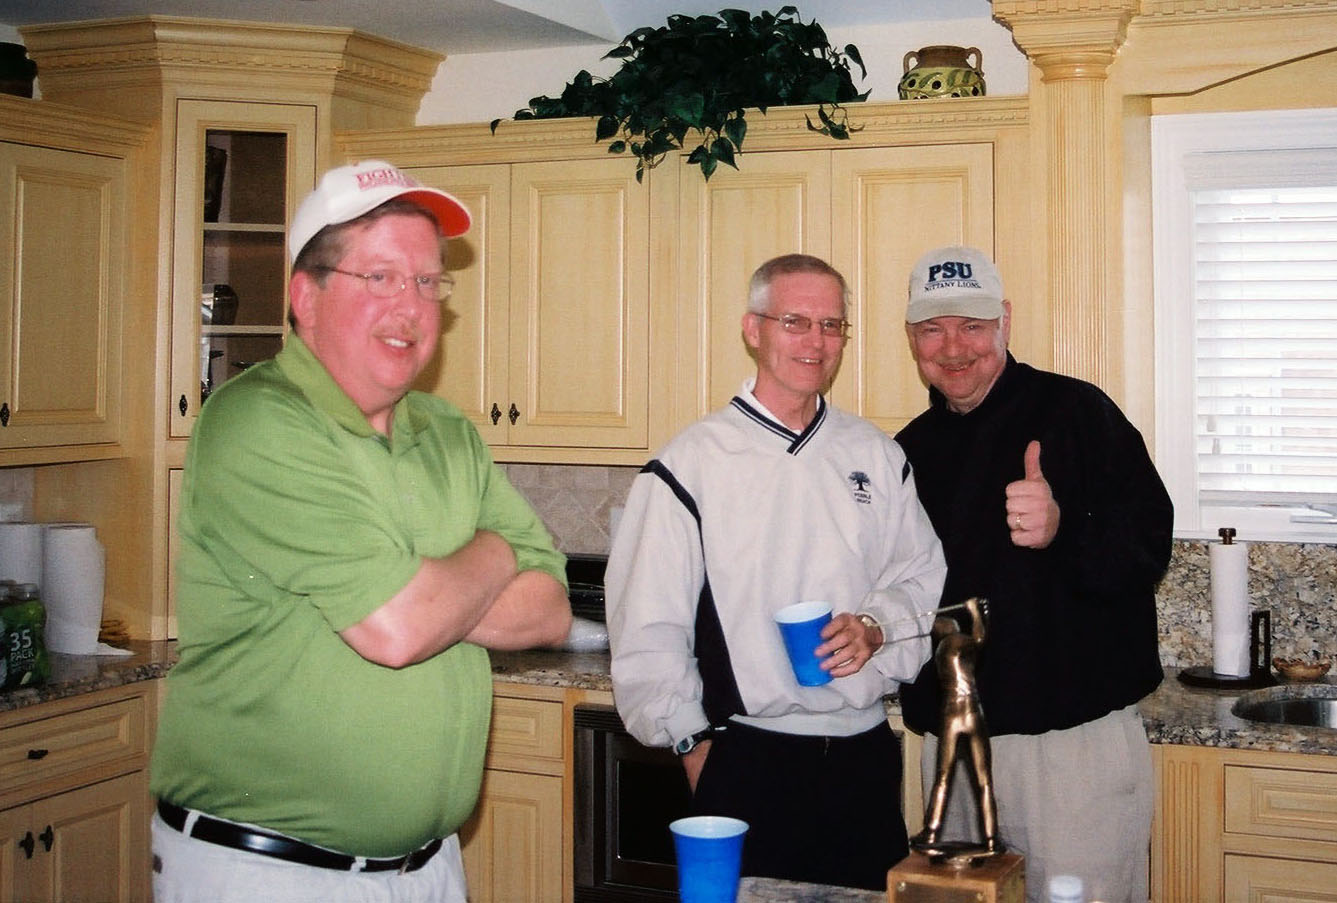  L to R: Victor Howe, TK and David Matthews
2010 Theta Chi Gold Open 